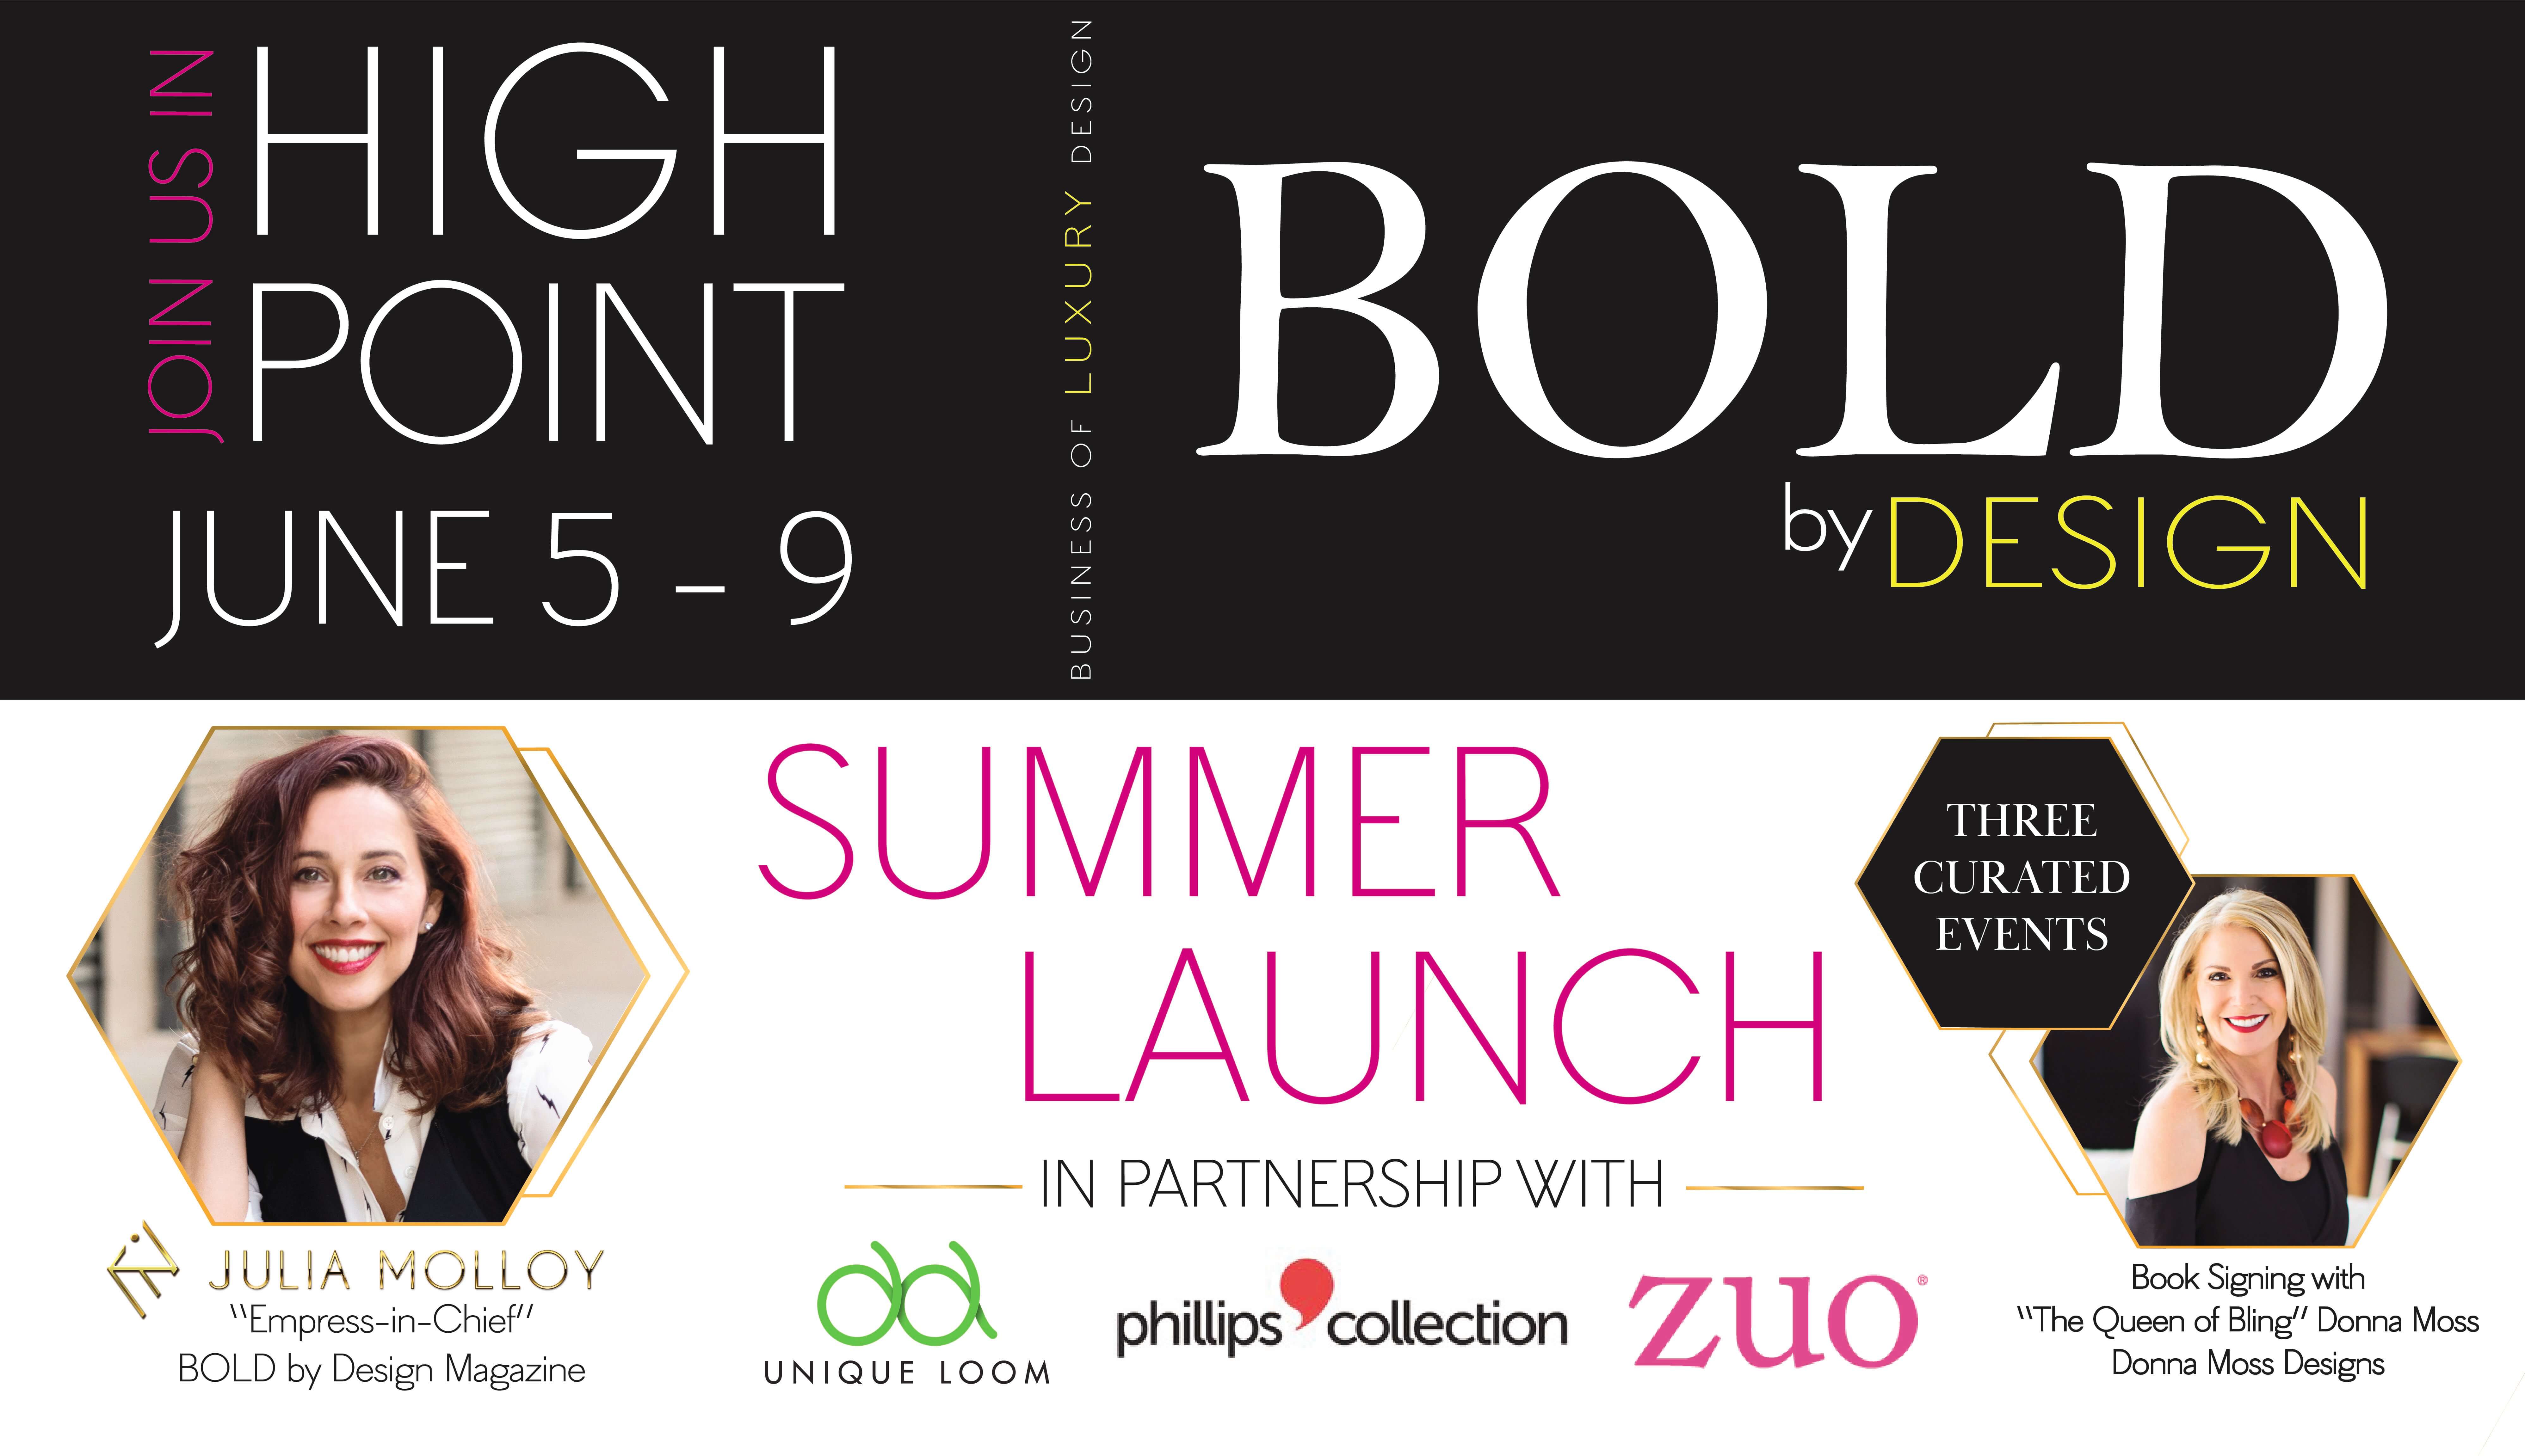 ZUO announces BOLD Happy Hour Event June 05, at HP Market!